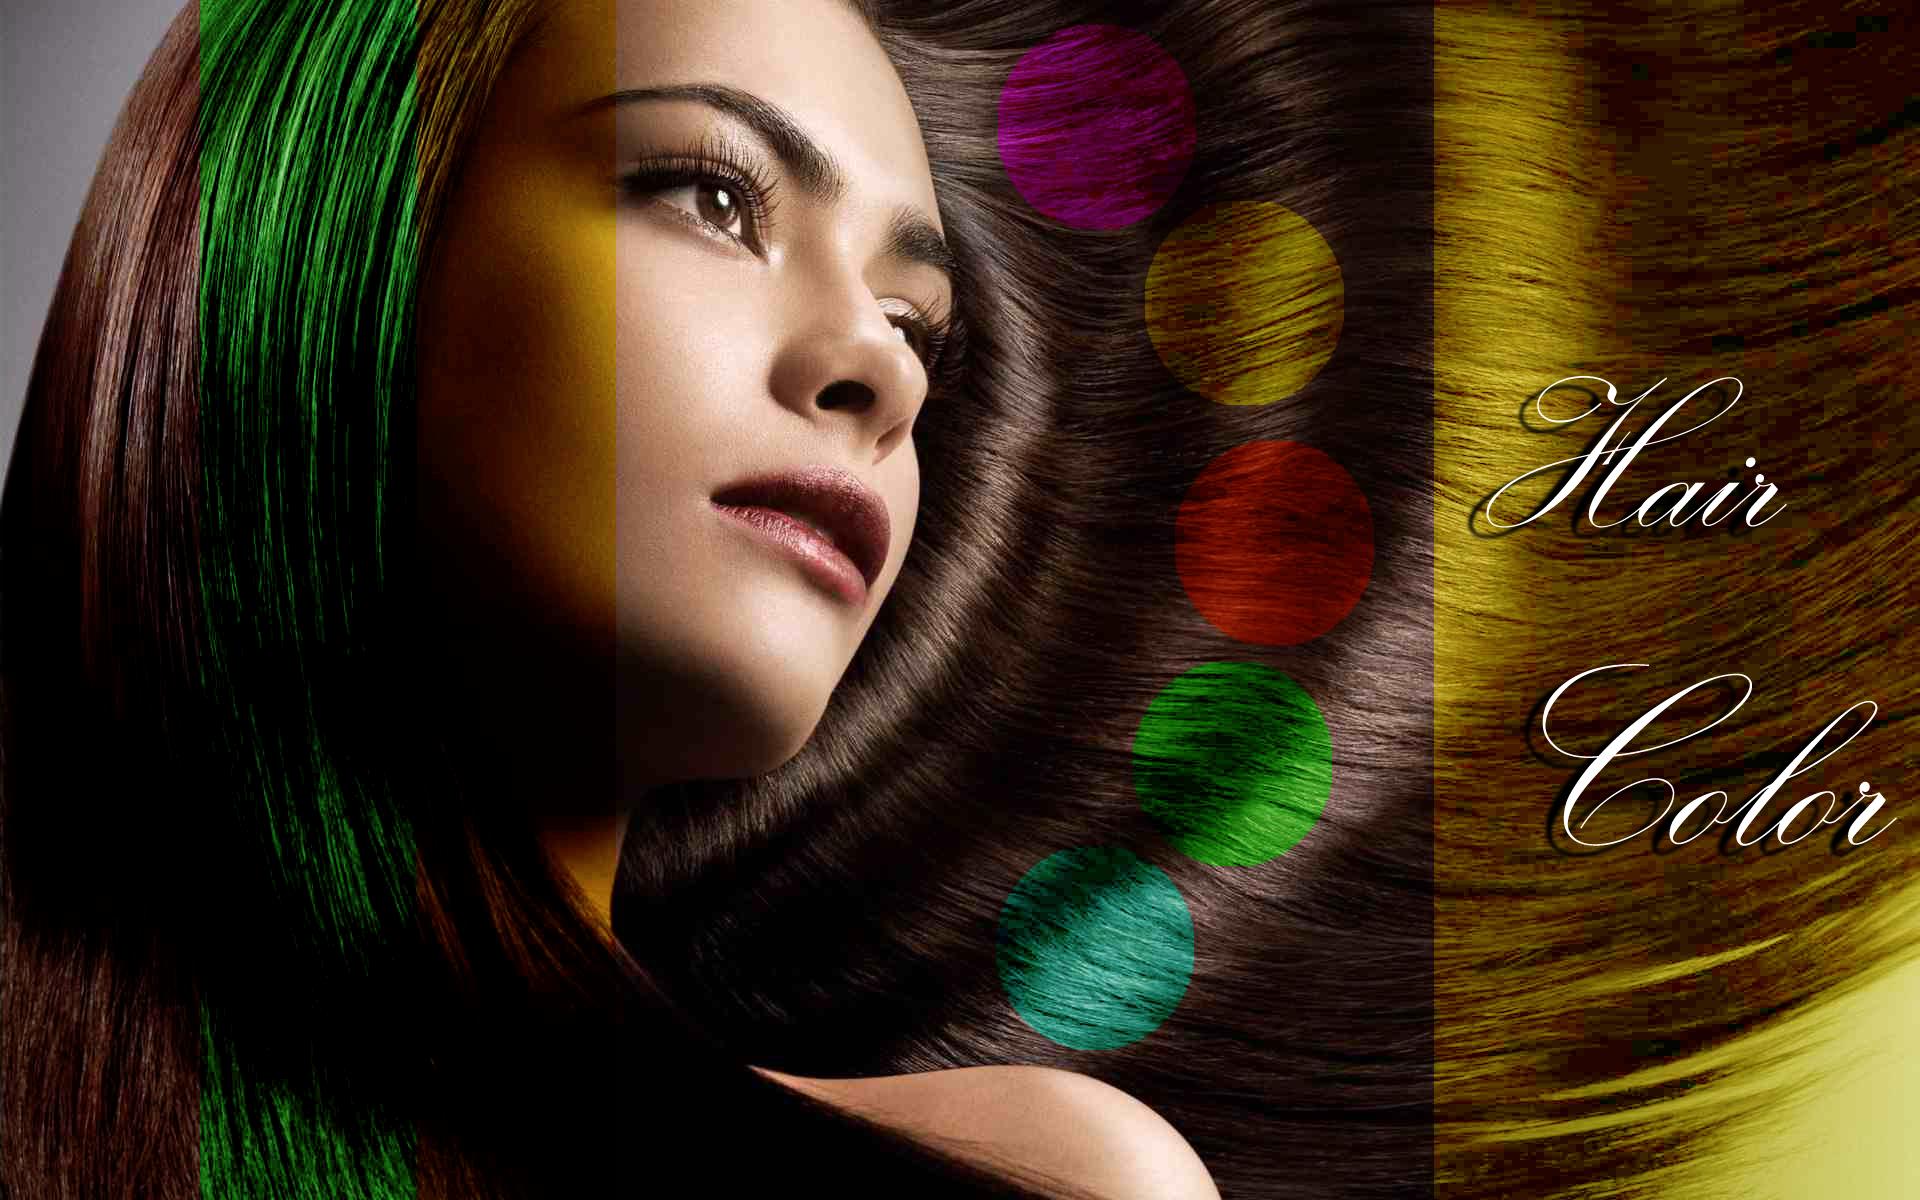 Hair Color Changer for Android - APK Download